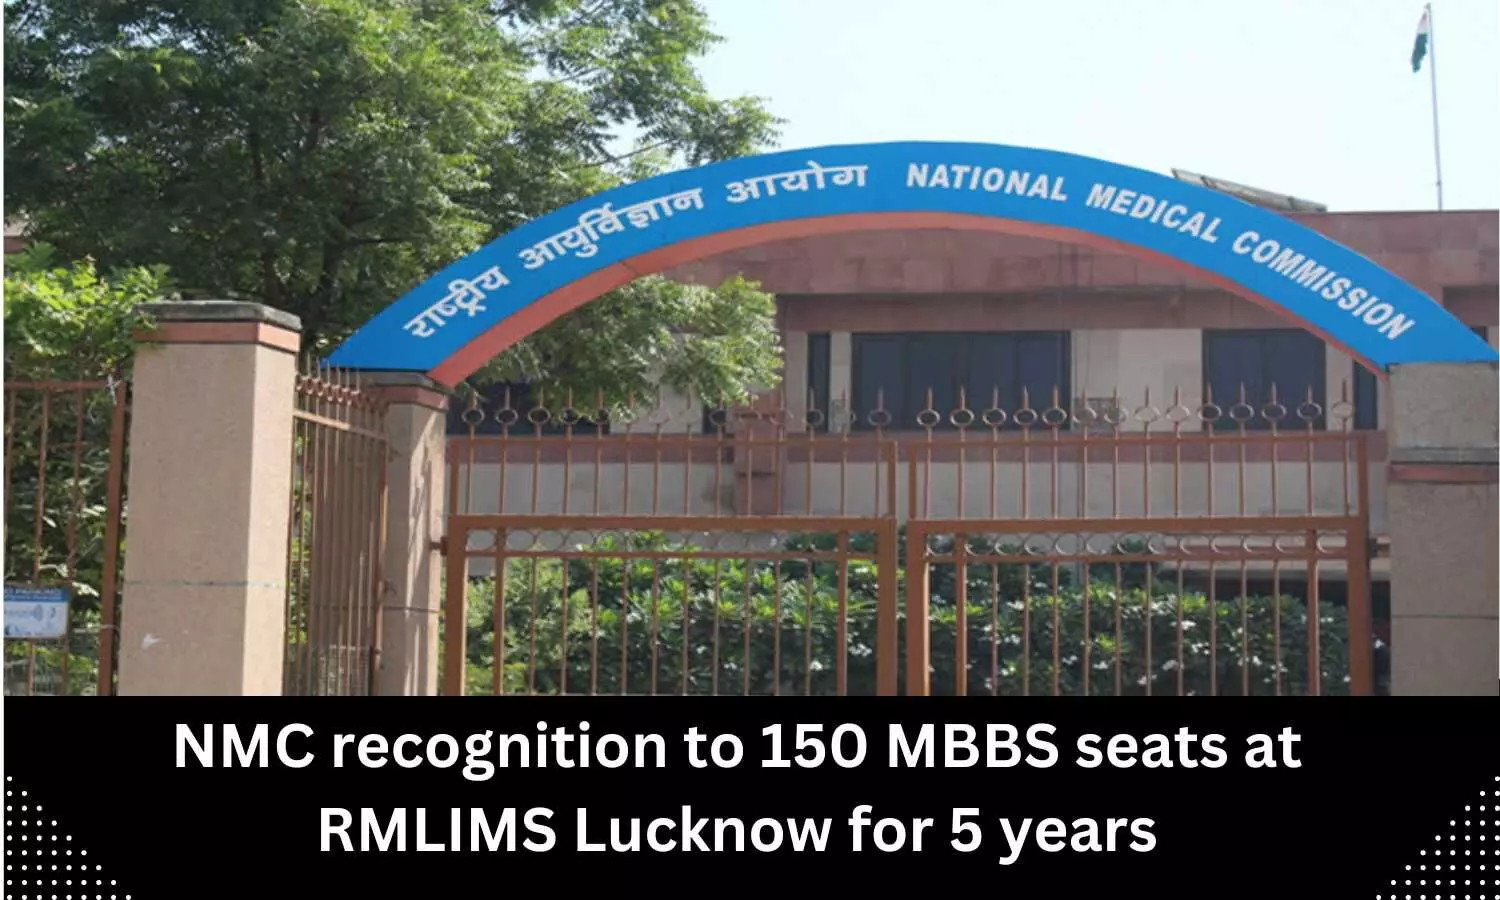 NMC grants recognition for 150 MBBS seats to RMLIMS Lucknow